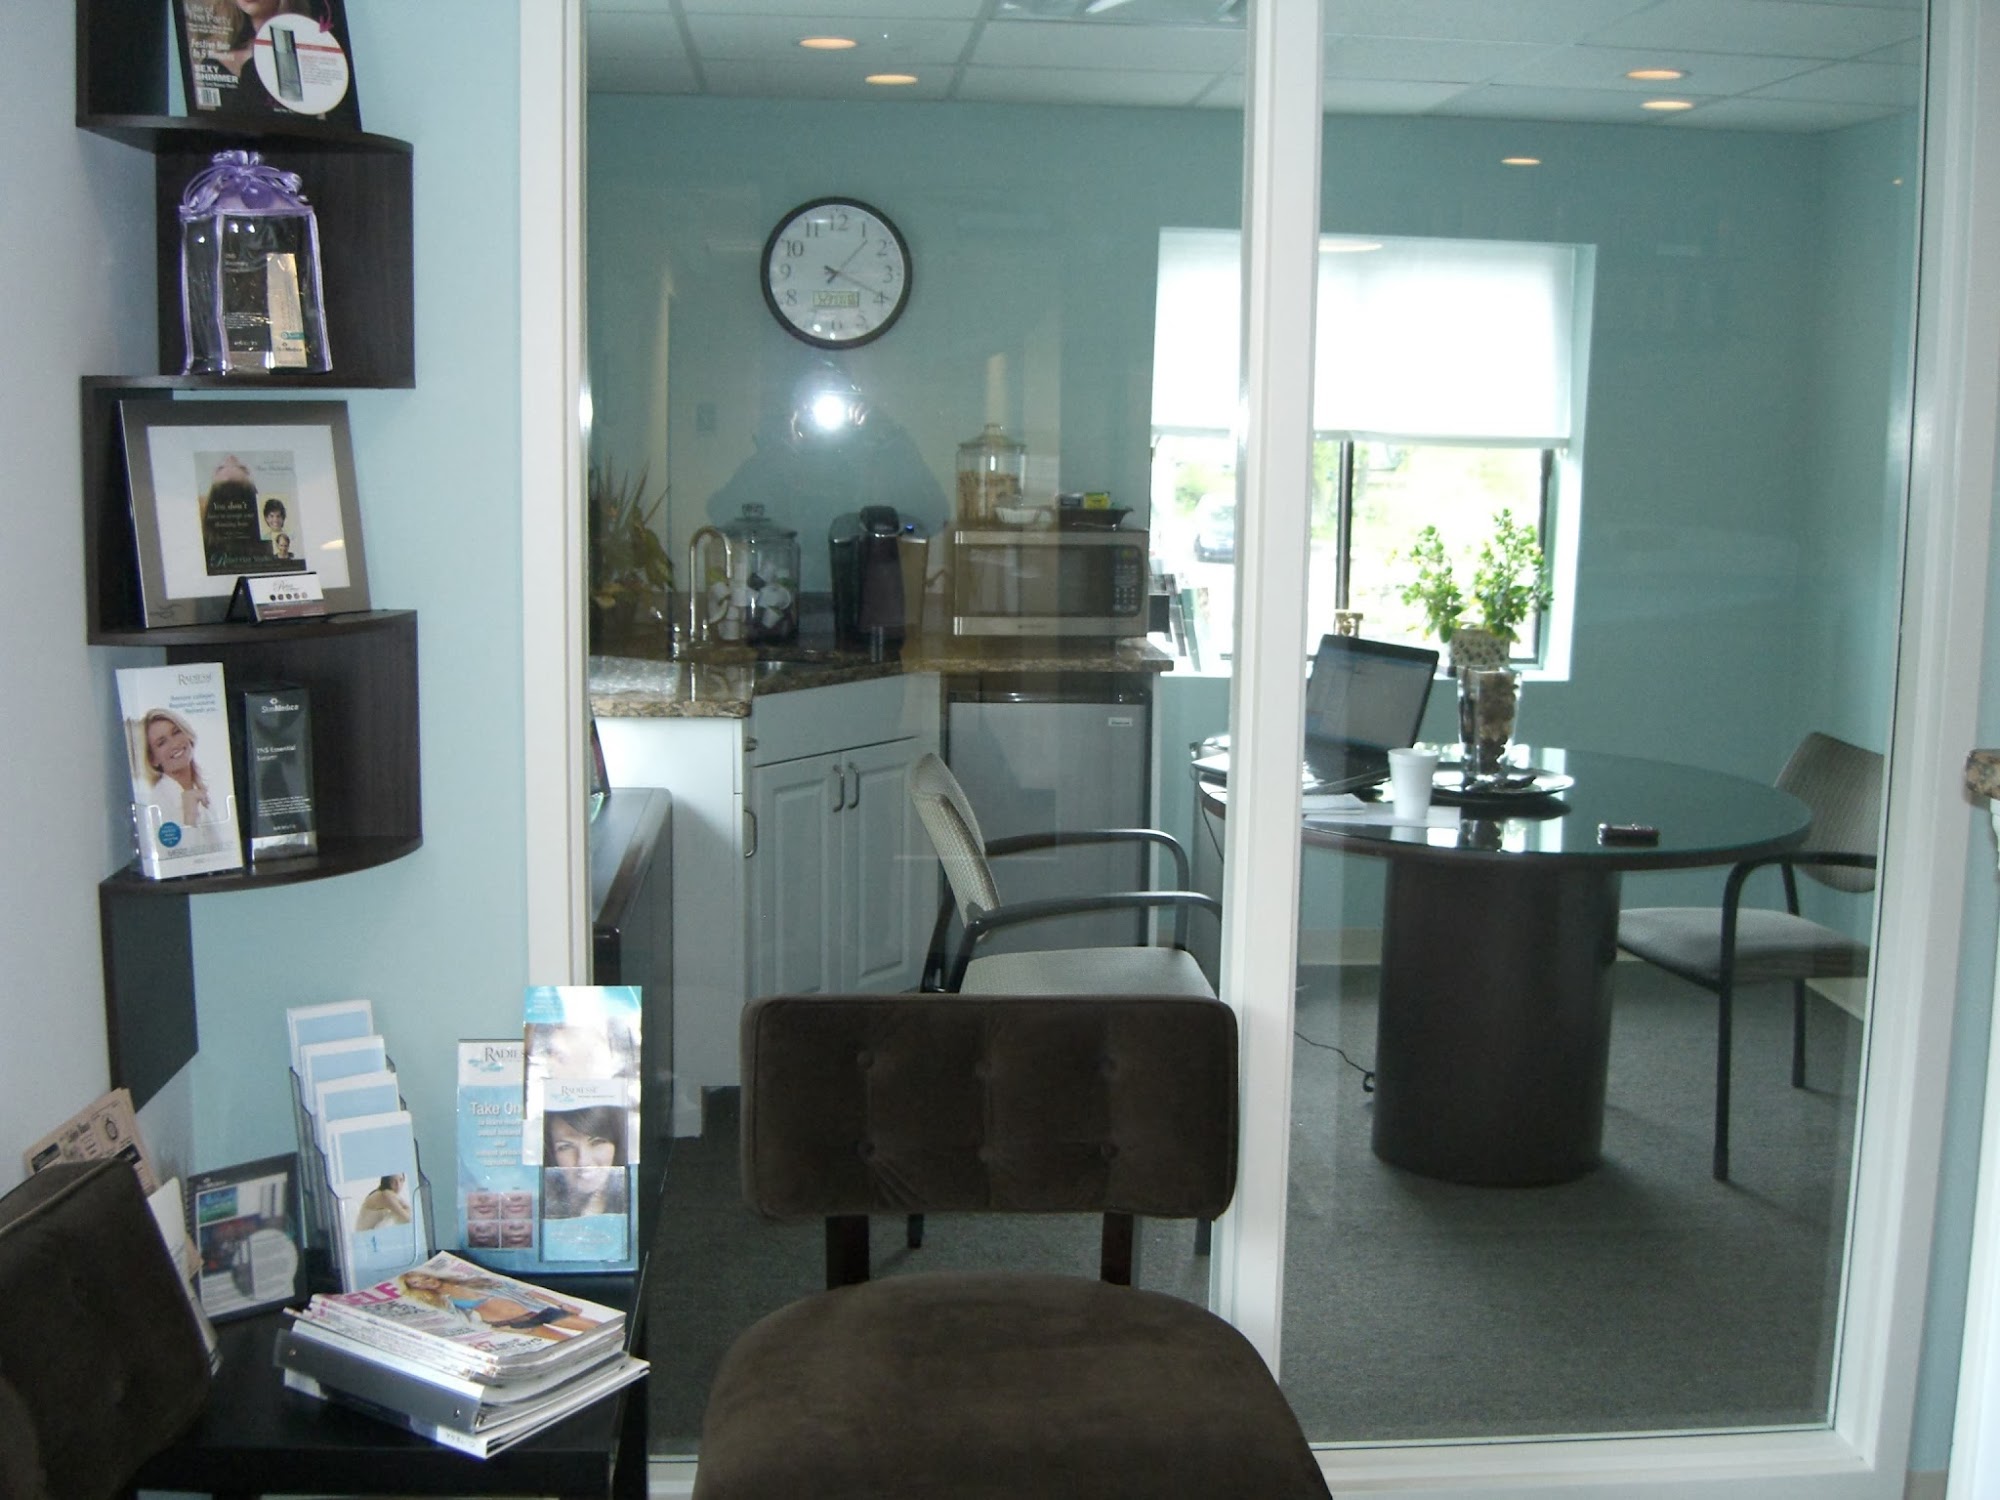 Excel Laser Skin Clinic 435 Columbian St #5, South Weymouth Massachusetts 02190